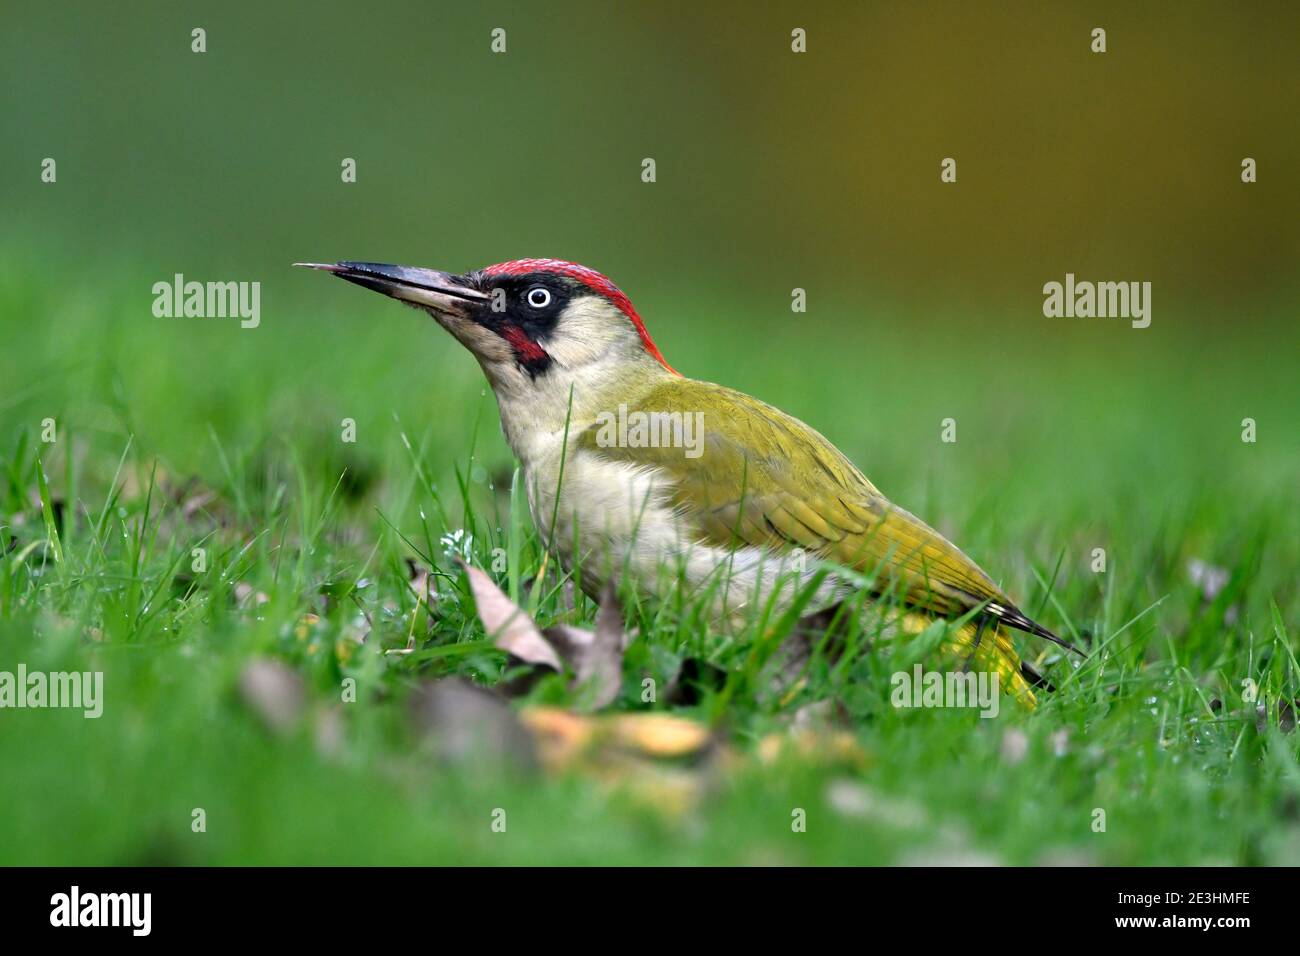 Green Woodpecker (Picus viridis) male sitting on grassy ground, tongue extended, Wales, November Stock Photo